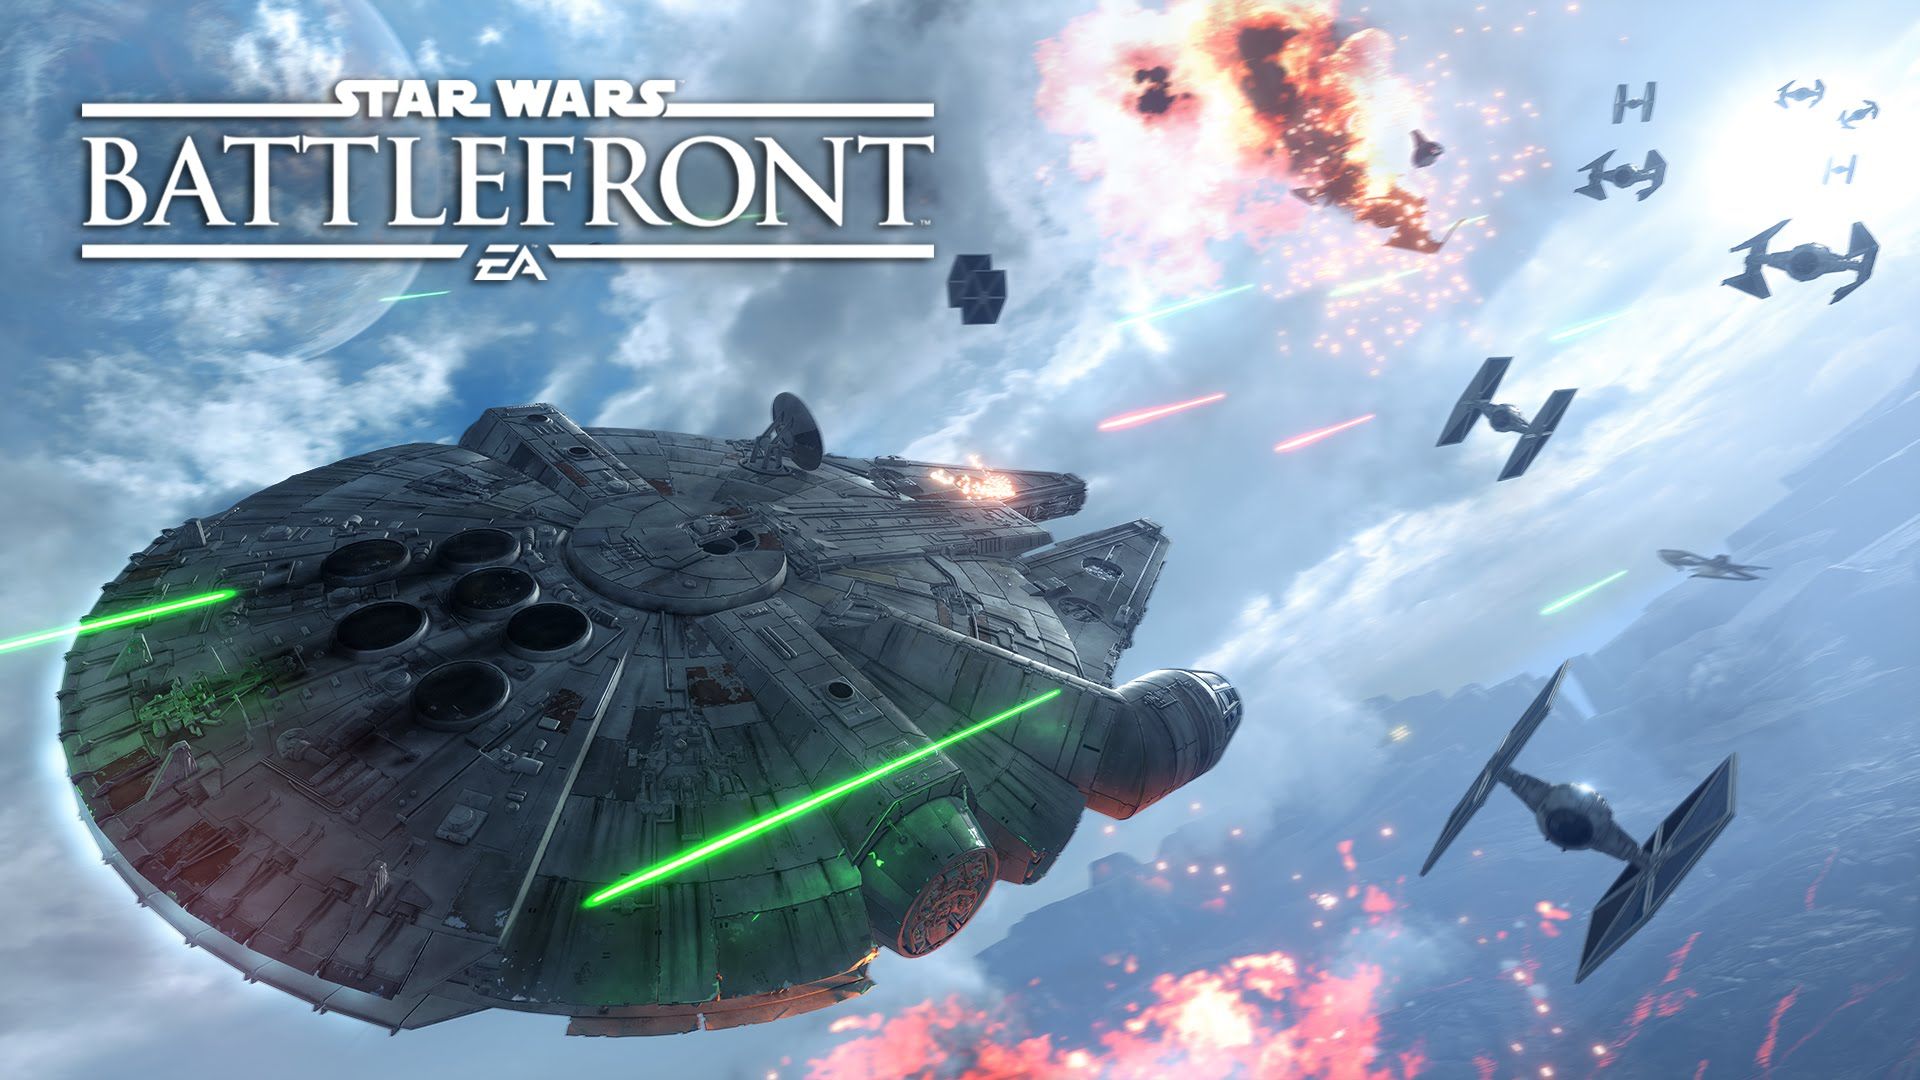 Star Wars Battlefront Latest PC Update Brings Back Frame Rate Issues For Heroes VS Villains Mode